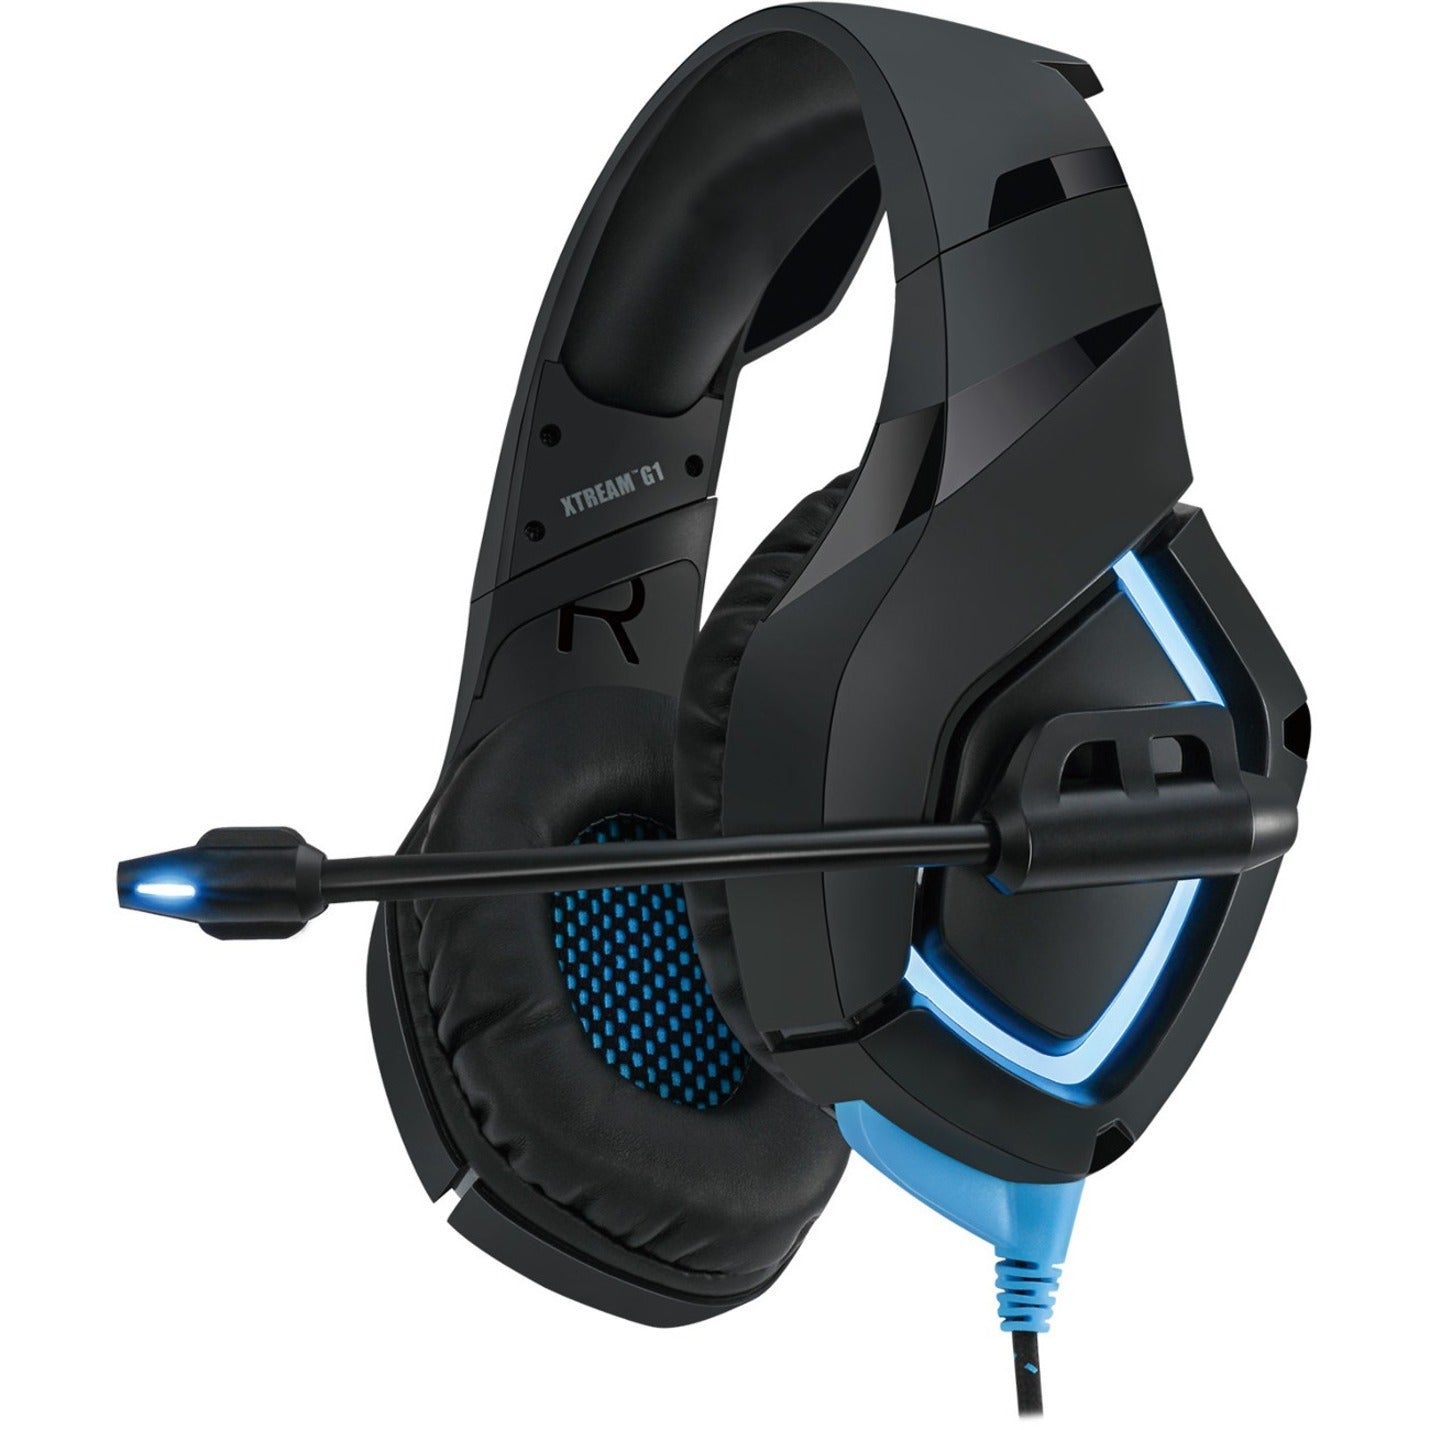 Adesso XTREAM G1 Stereo Gaming Headset with Microphone, Flexible, Comfortable, LED Lighting